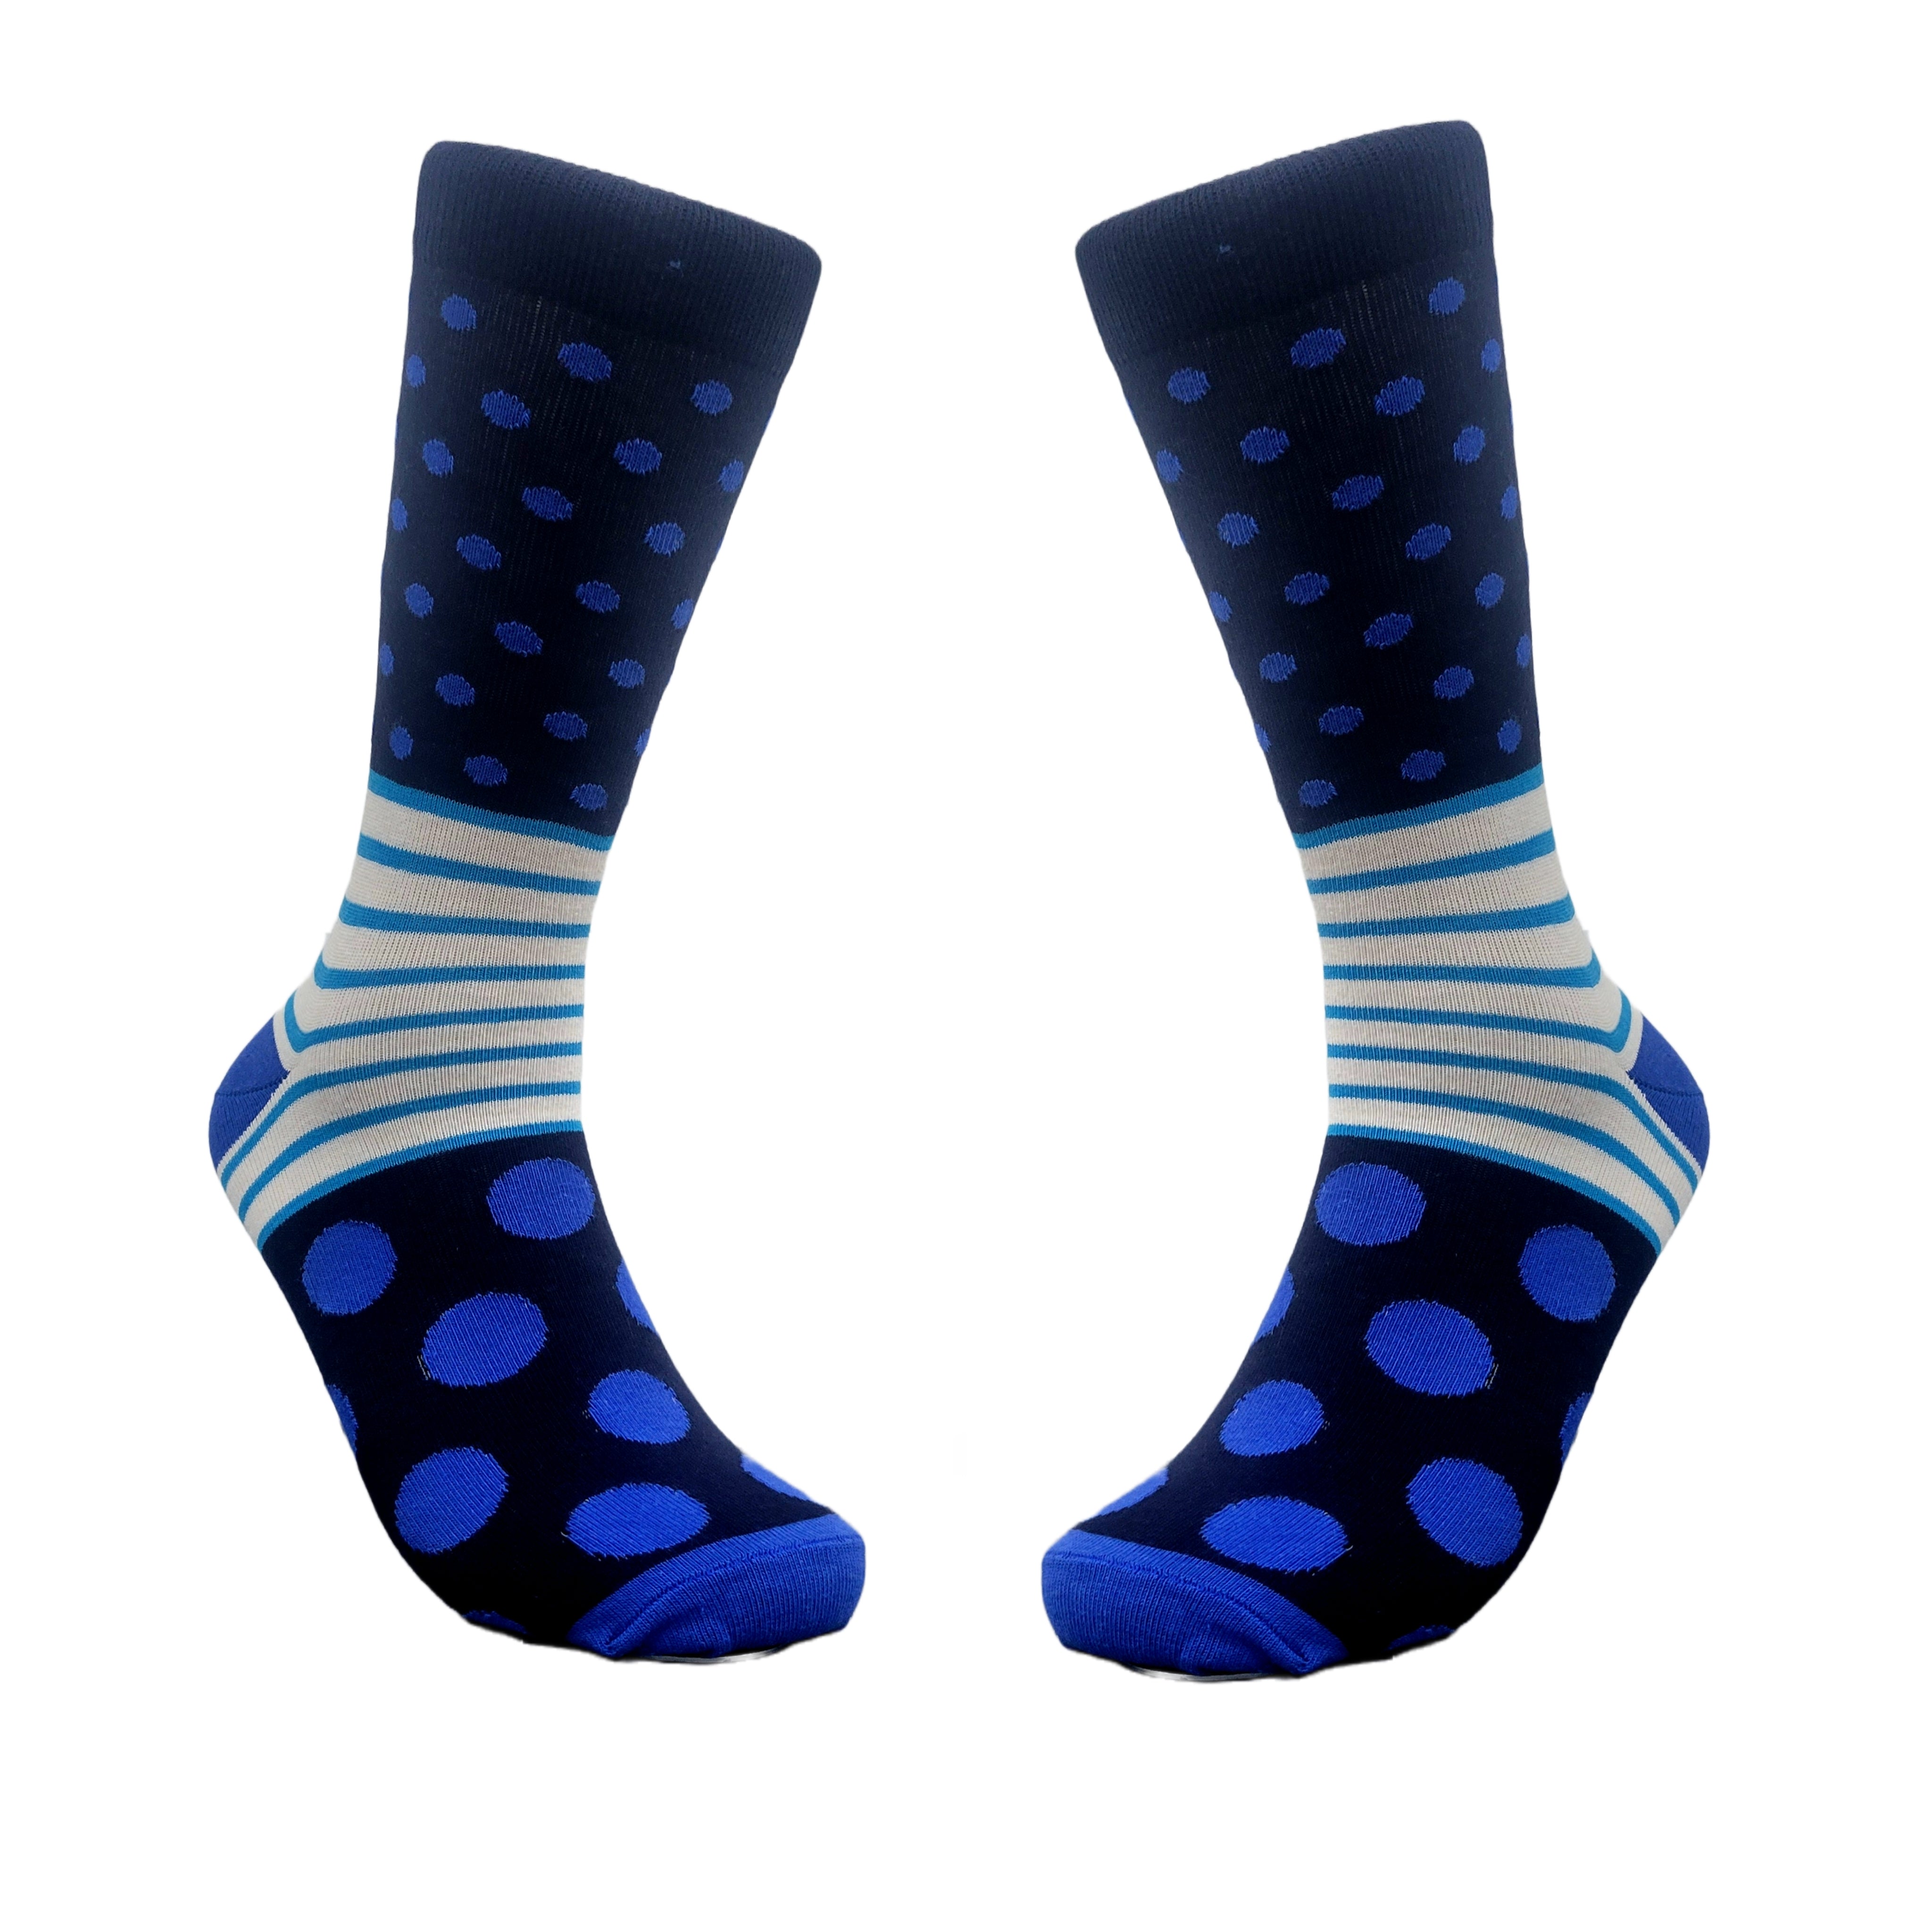 Stripes and Dot Patterned Socks from the Sock Panda (Adult Medium)